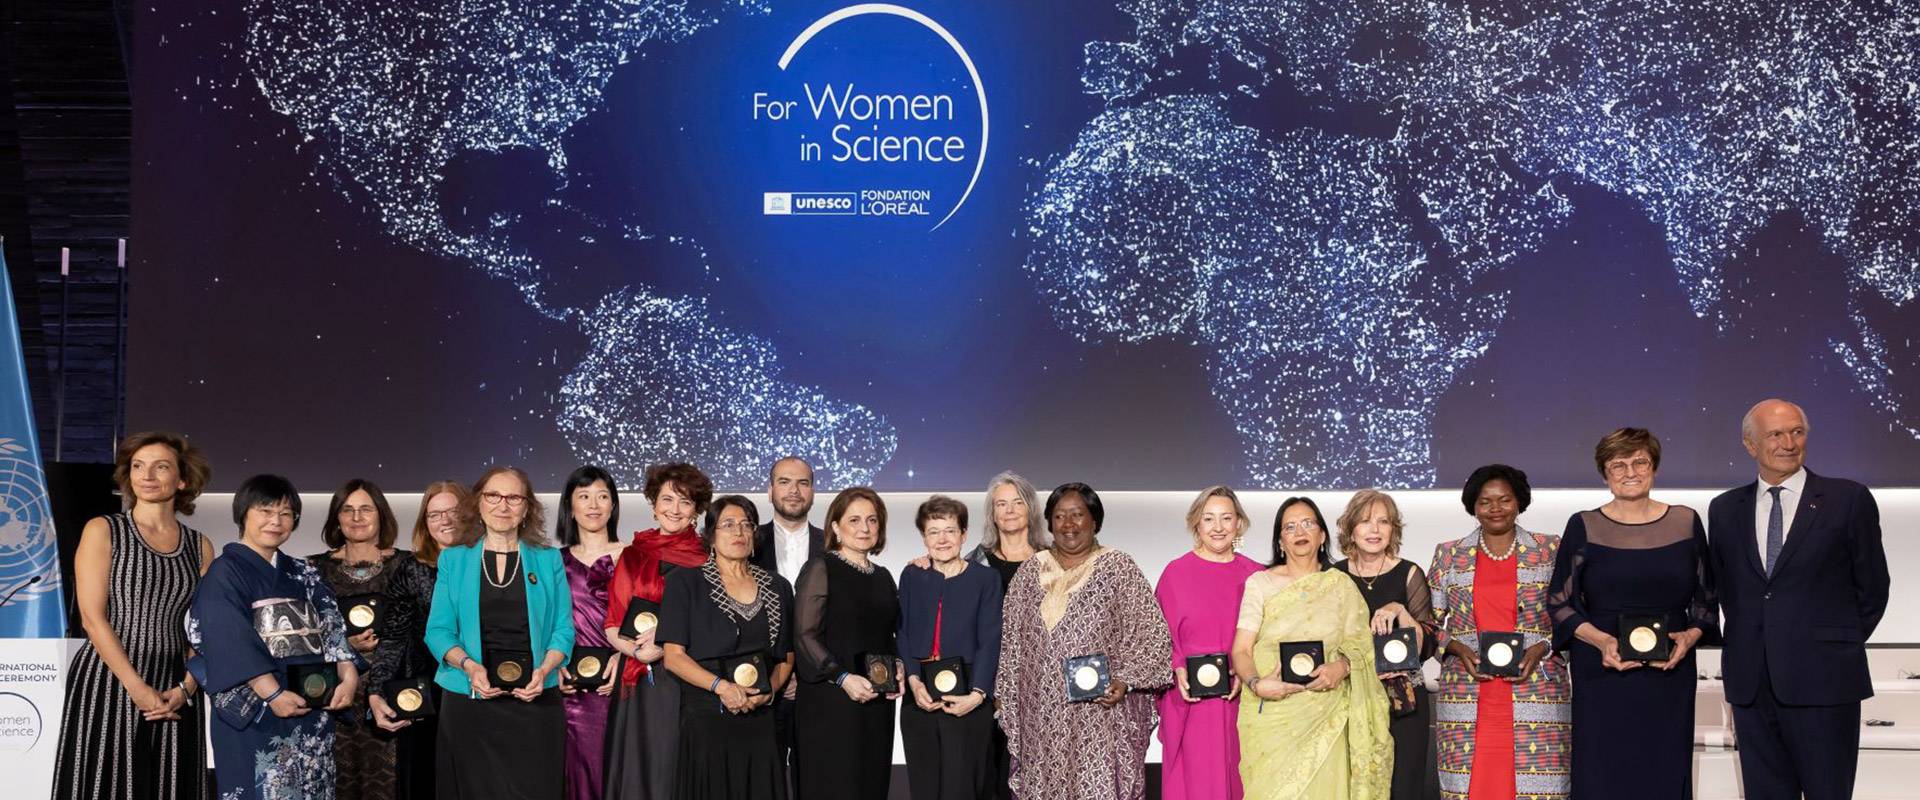 Research, Oreal rewards women scientists: €120,000 for under 35